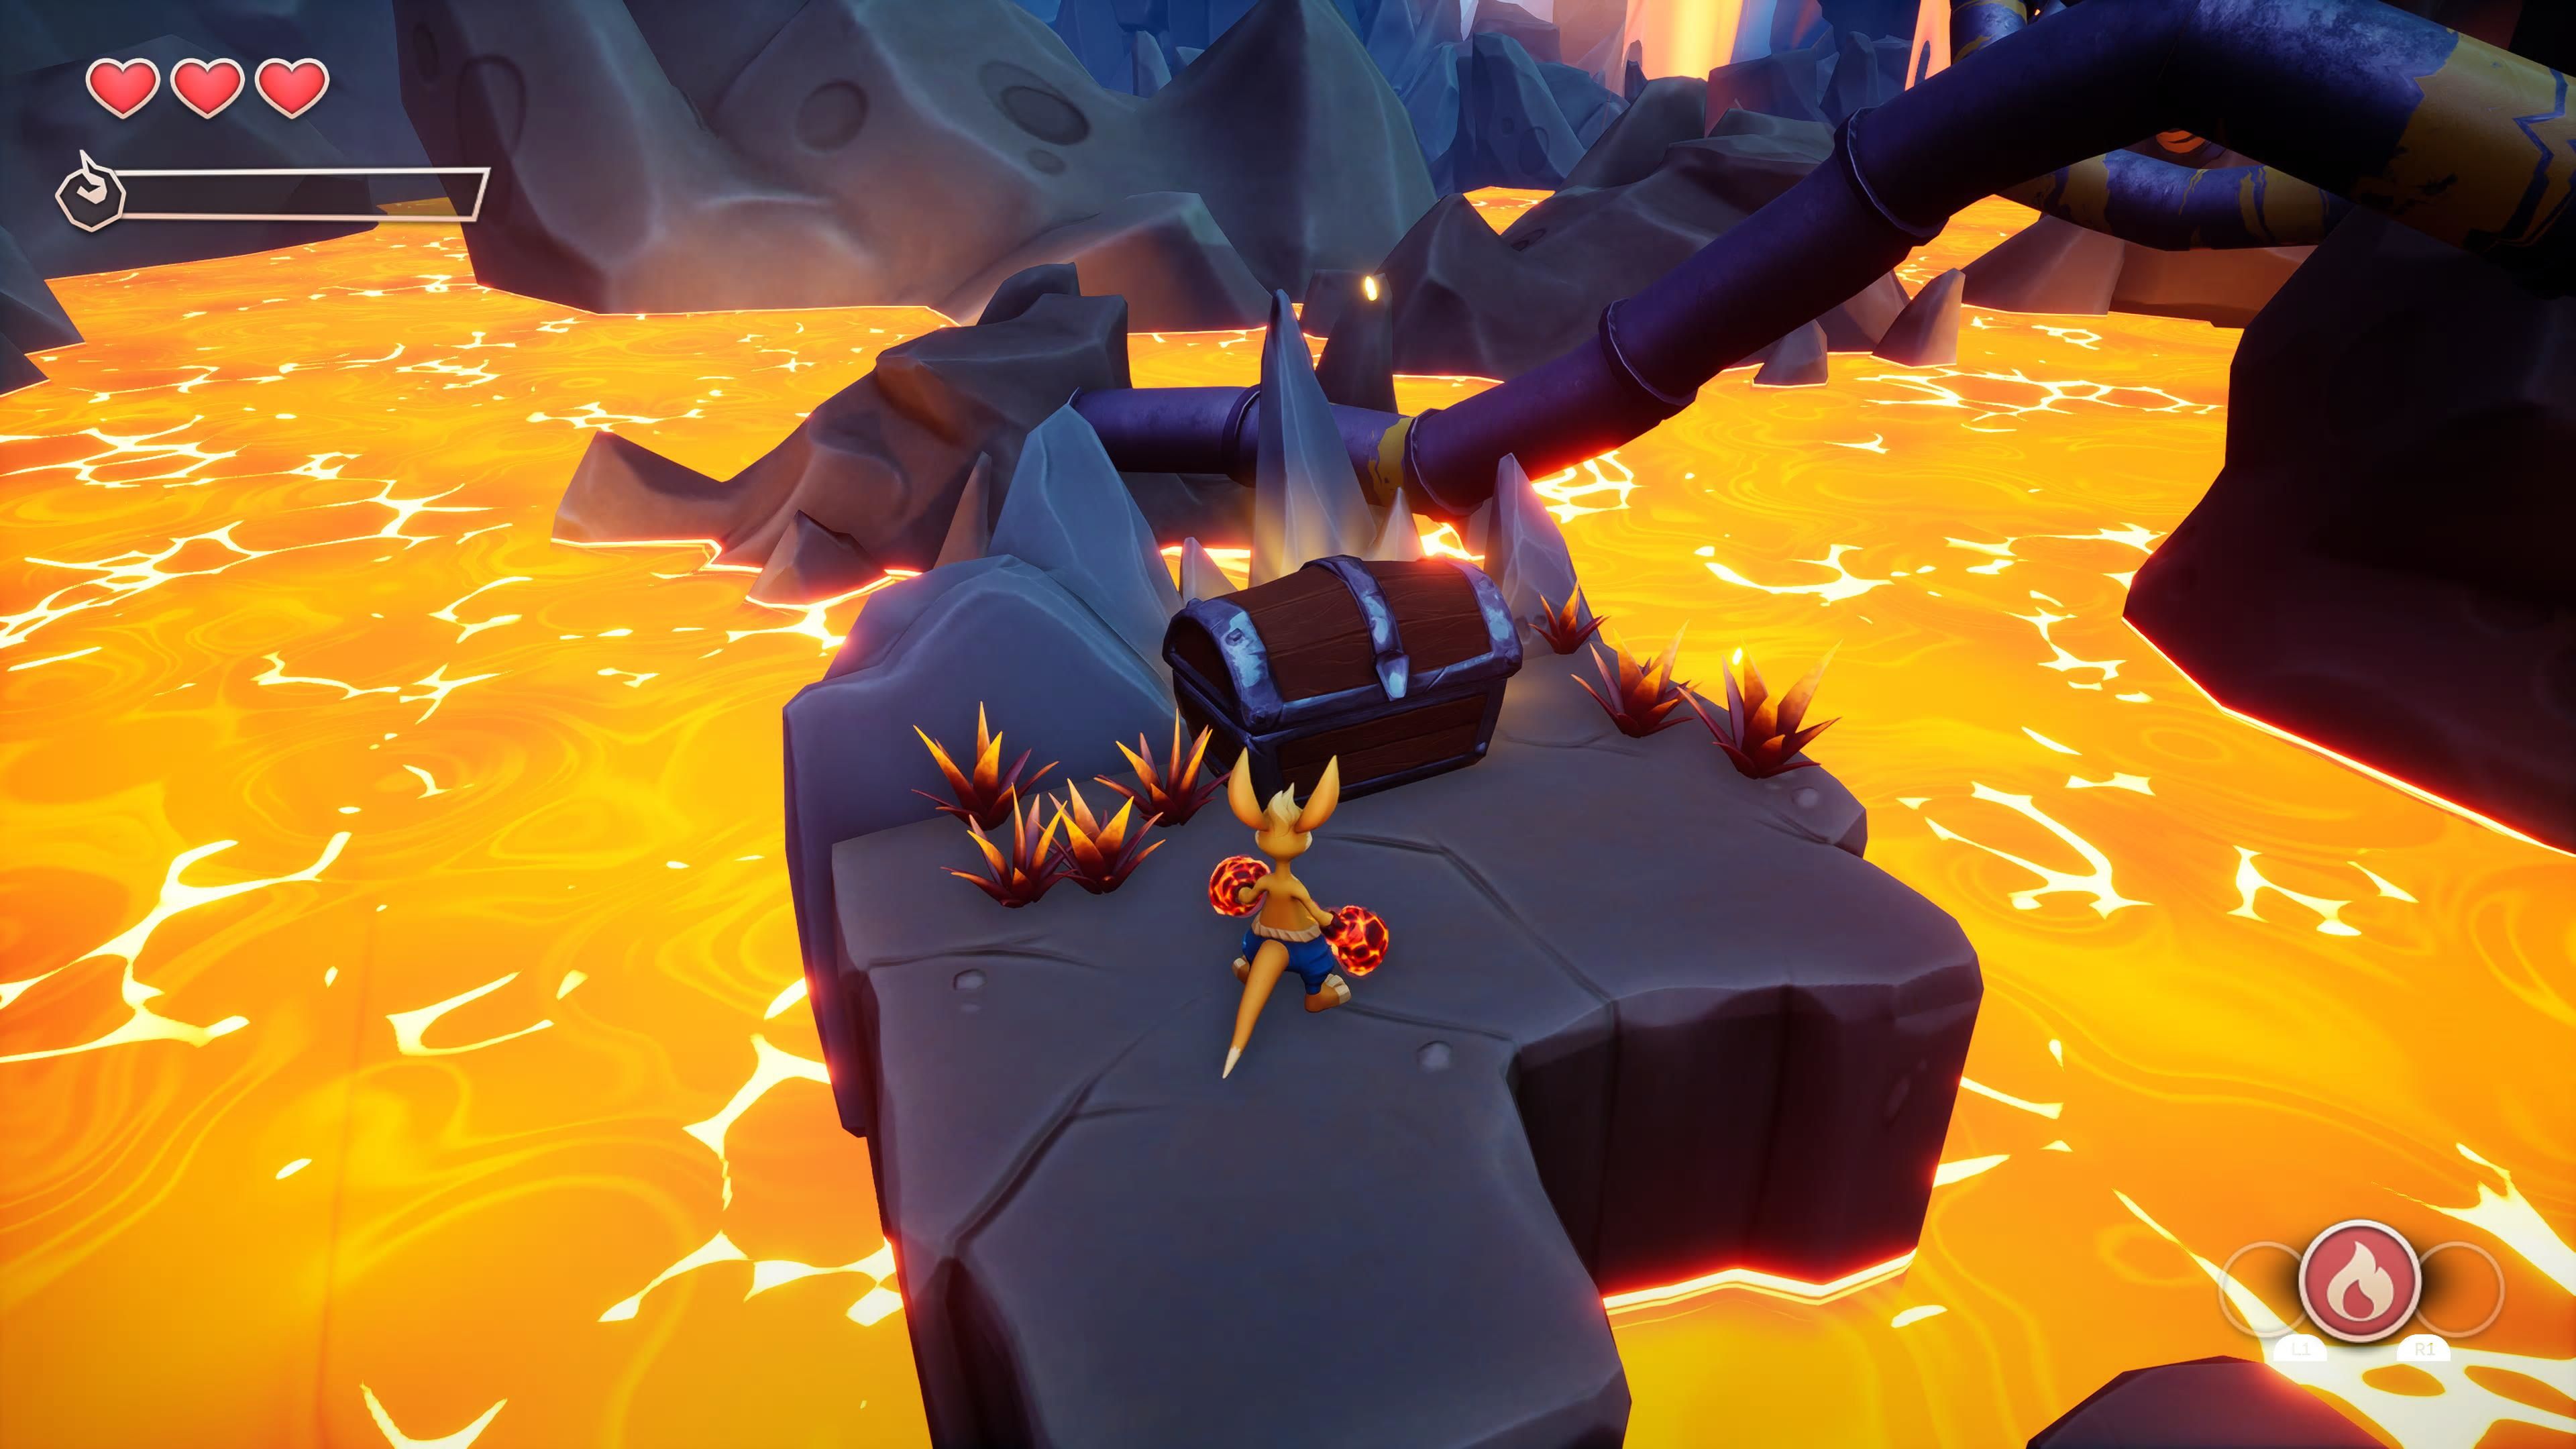 Treasure chest surrounded by lava